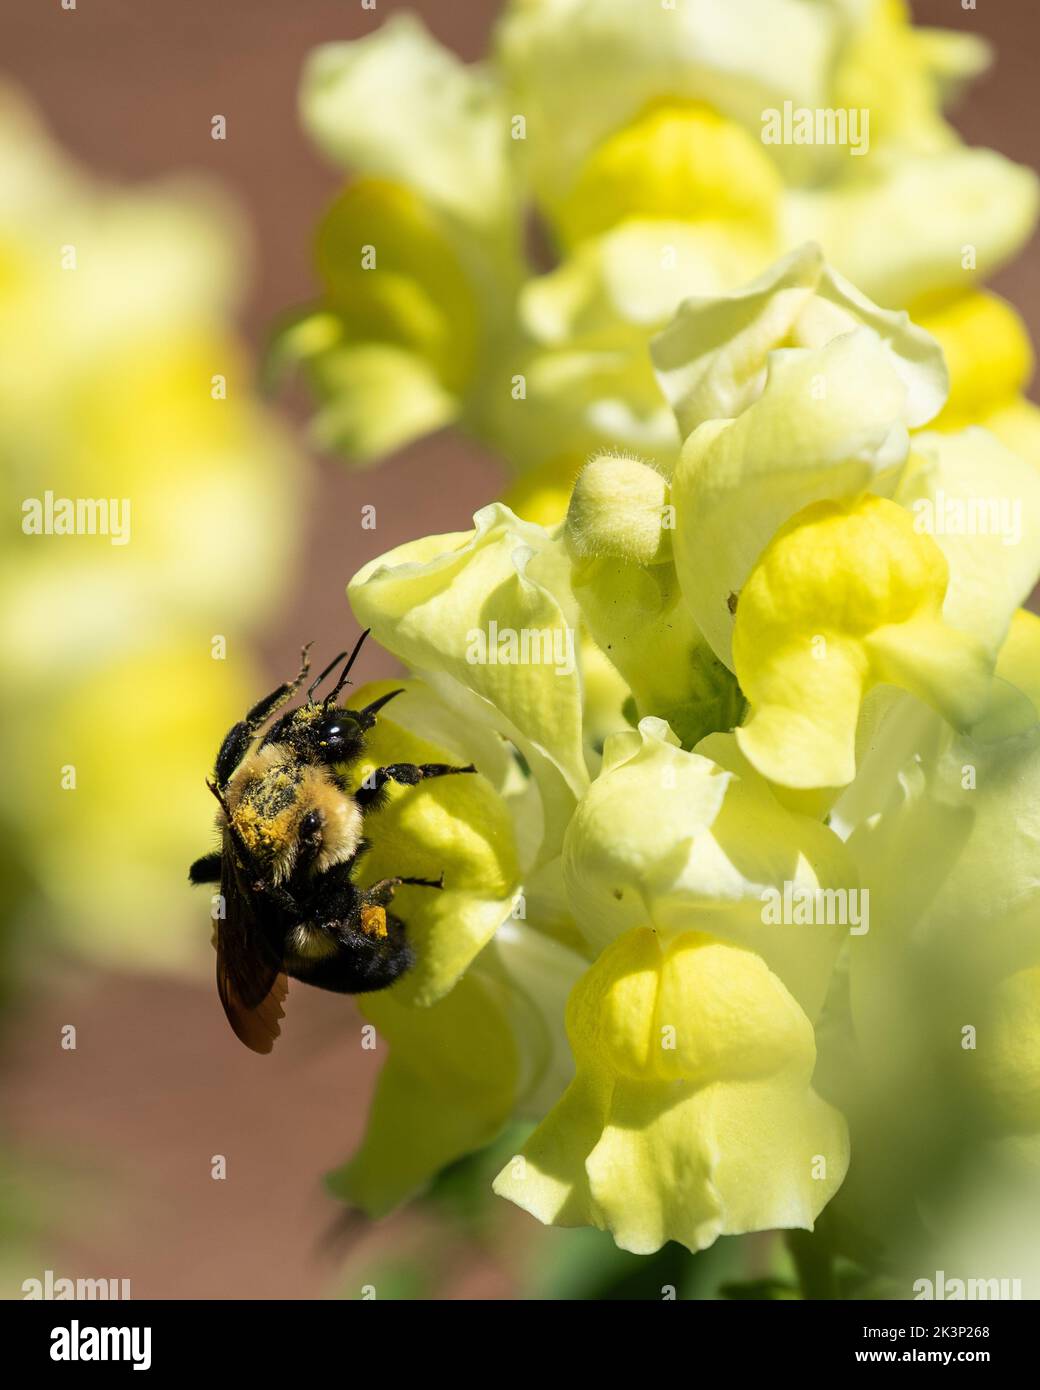 A closeup of a bumblebee on a snapdragon plant. Stock Photo